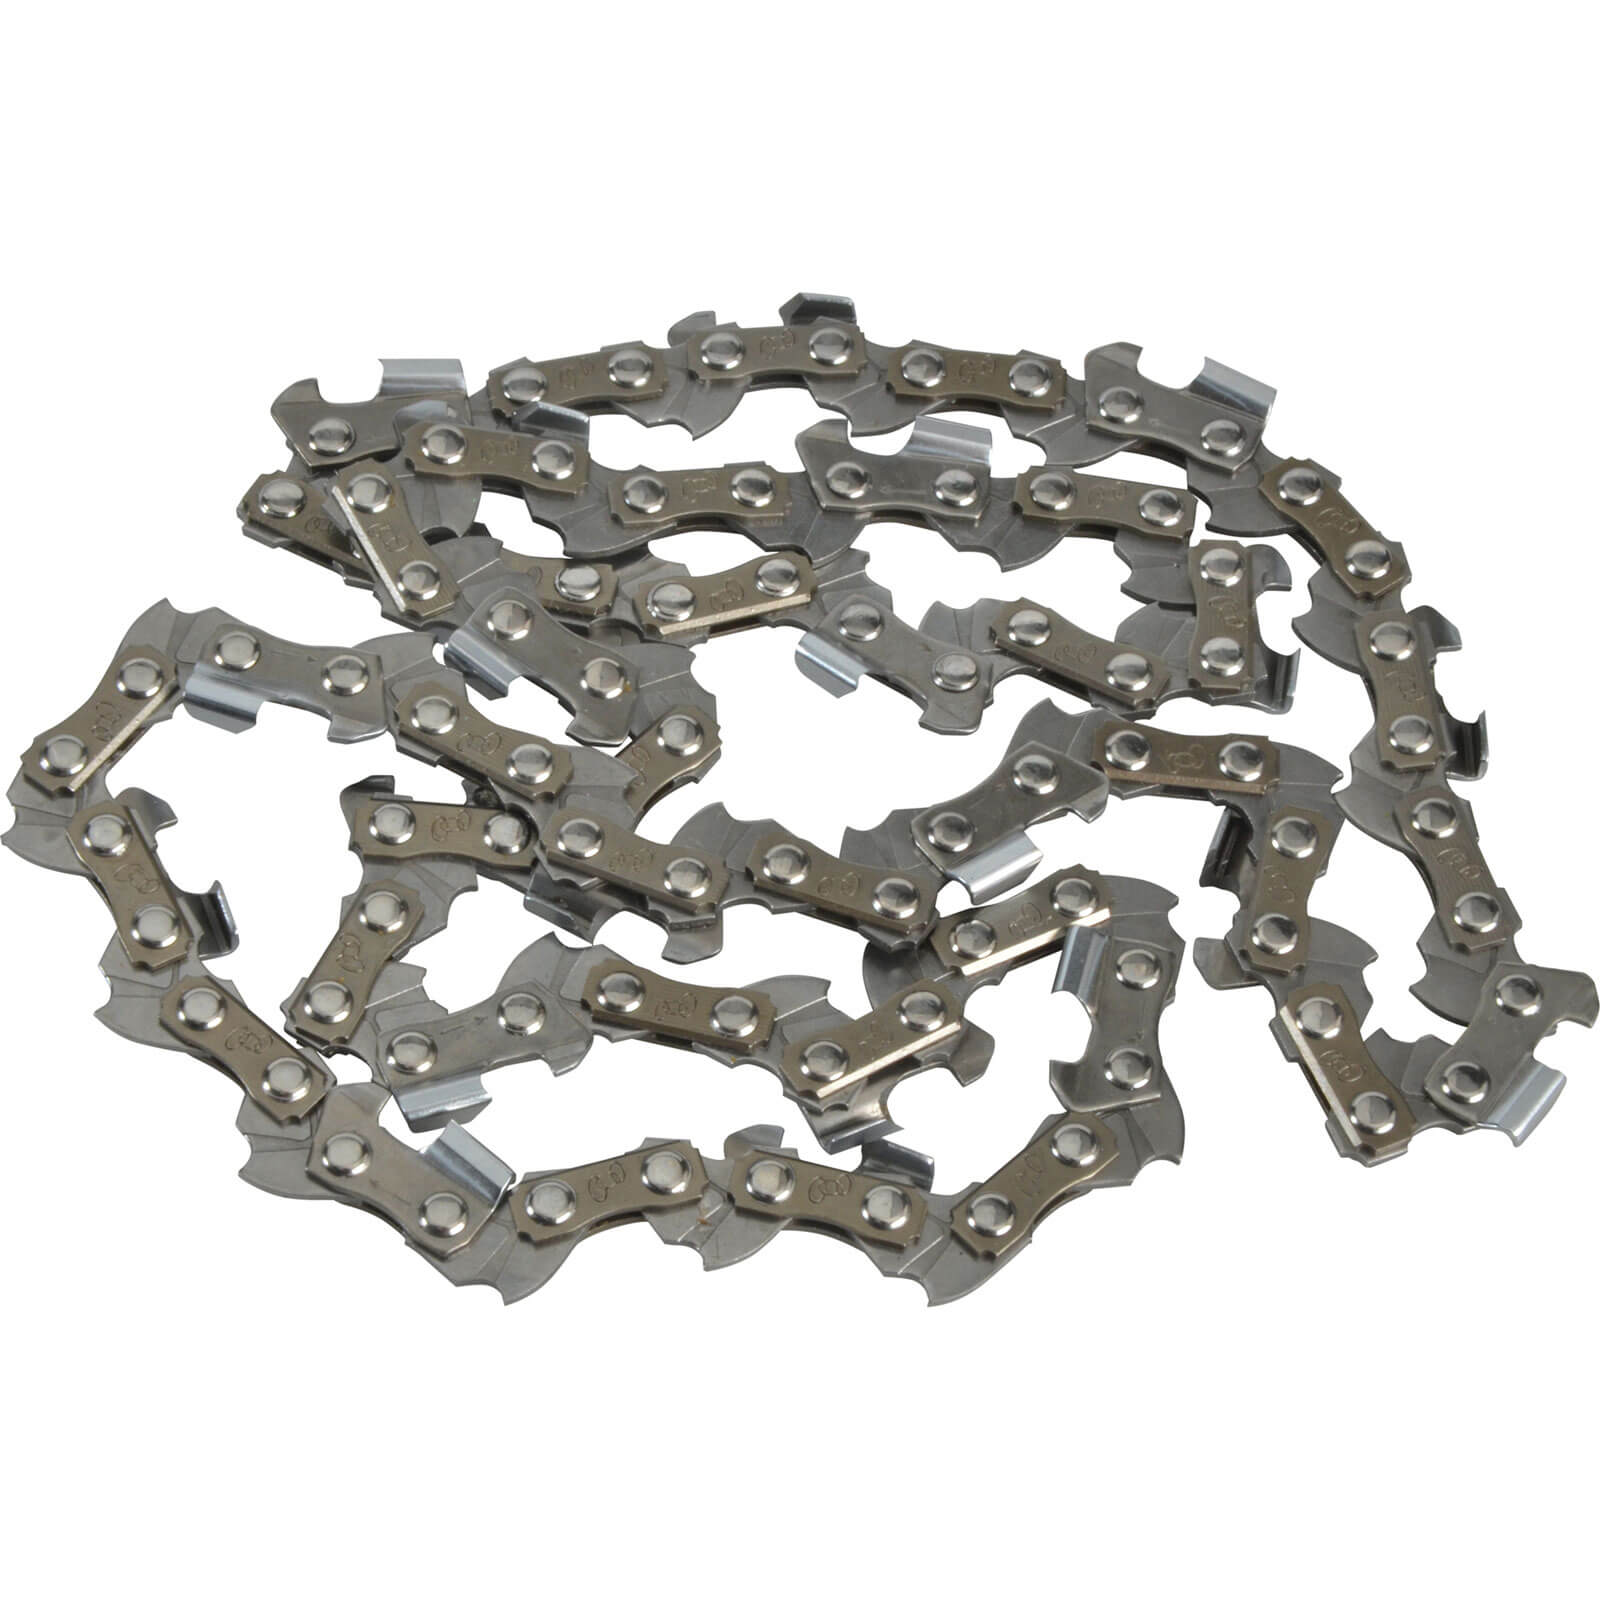 Image of ALM Replacement Lo-Kick Chain 3/8" x 45 Links for 30cm Chainsaws 300mm